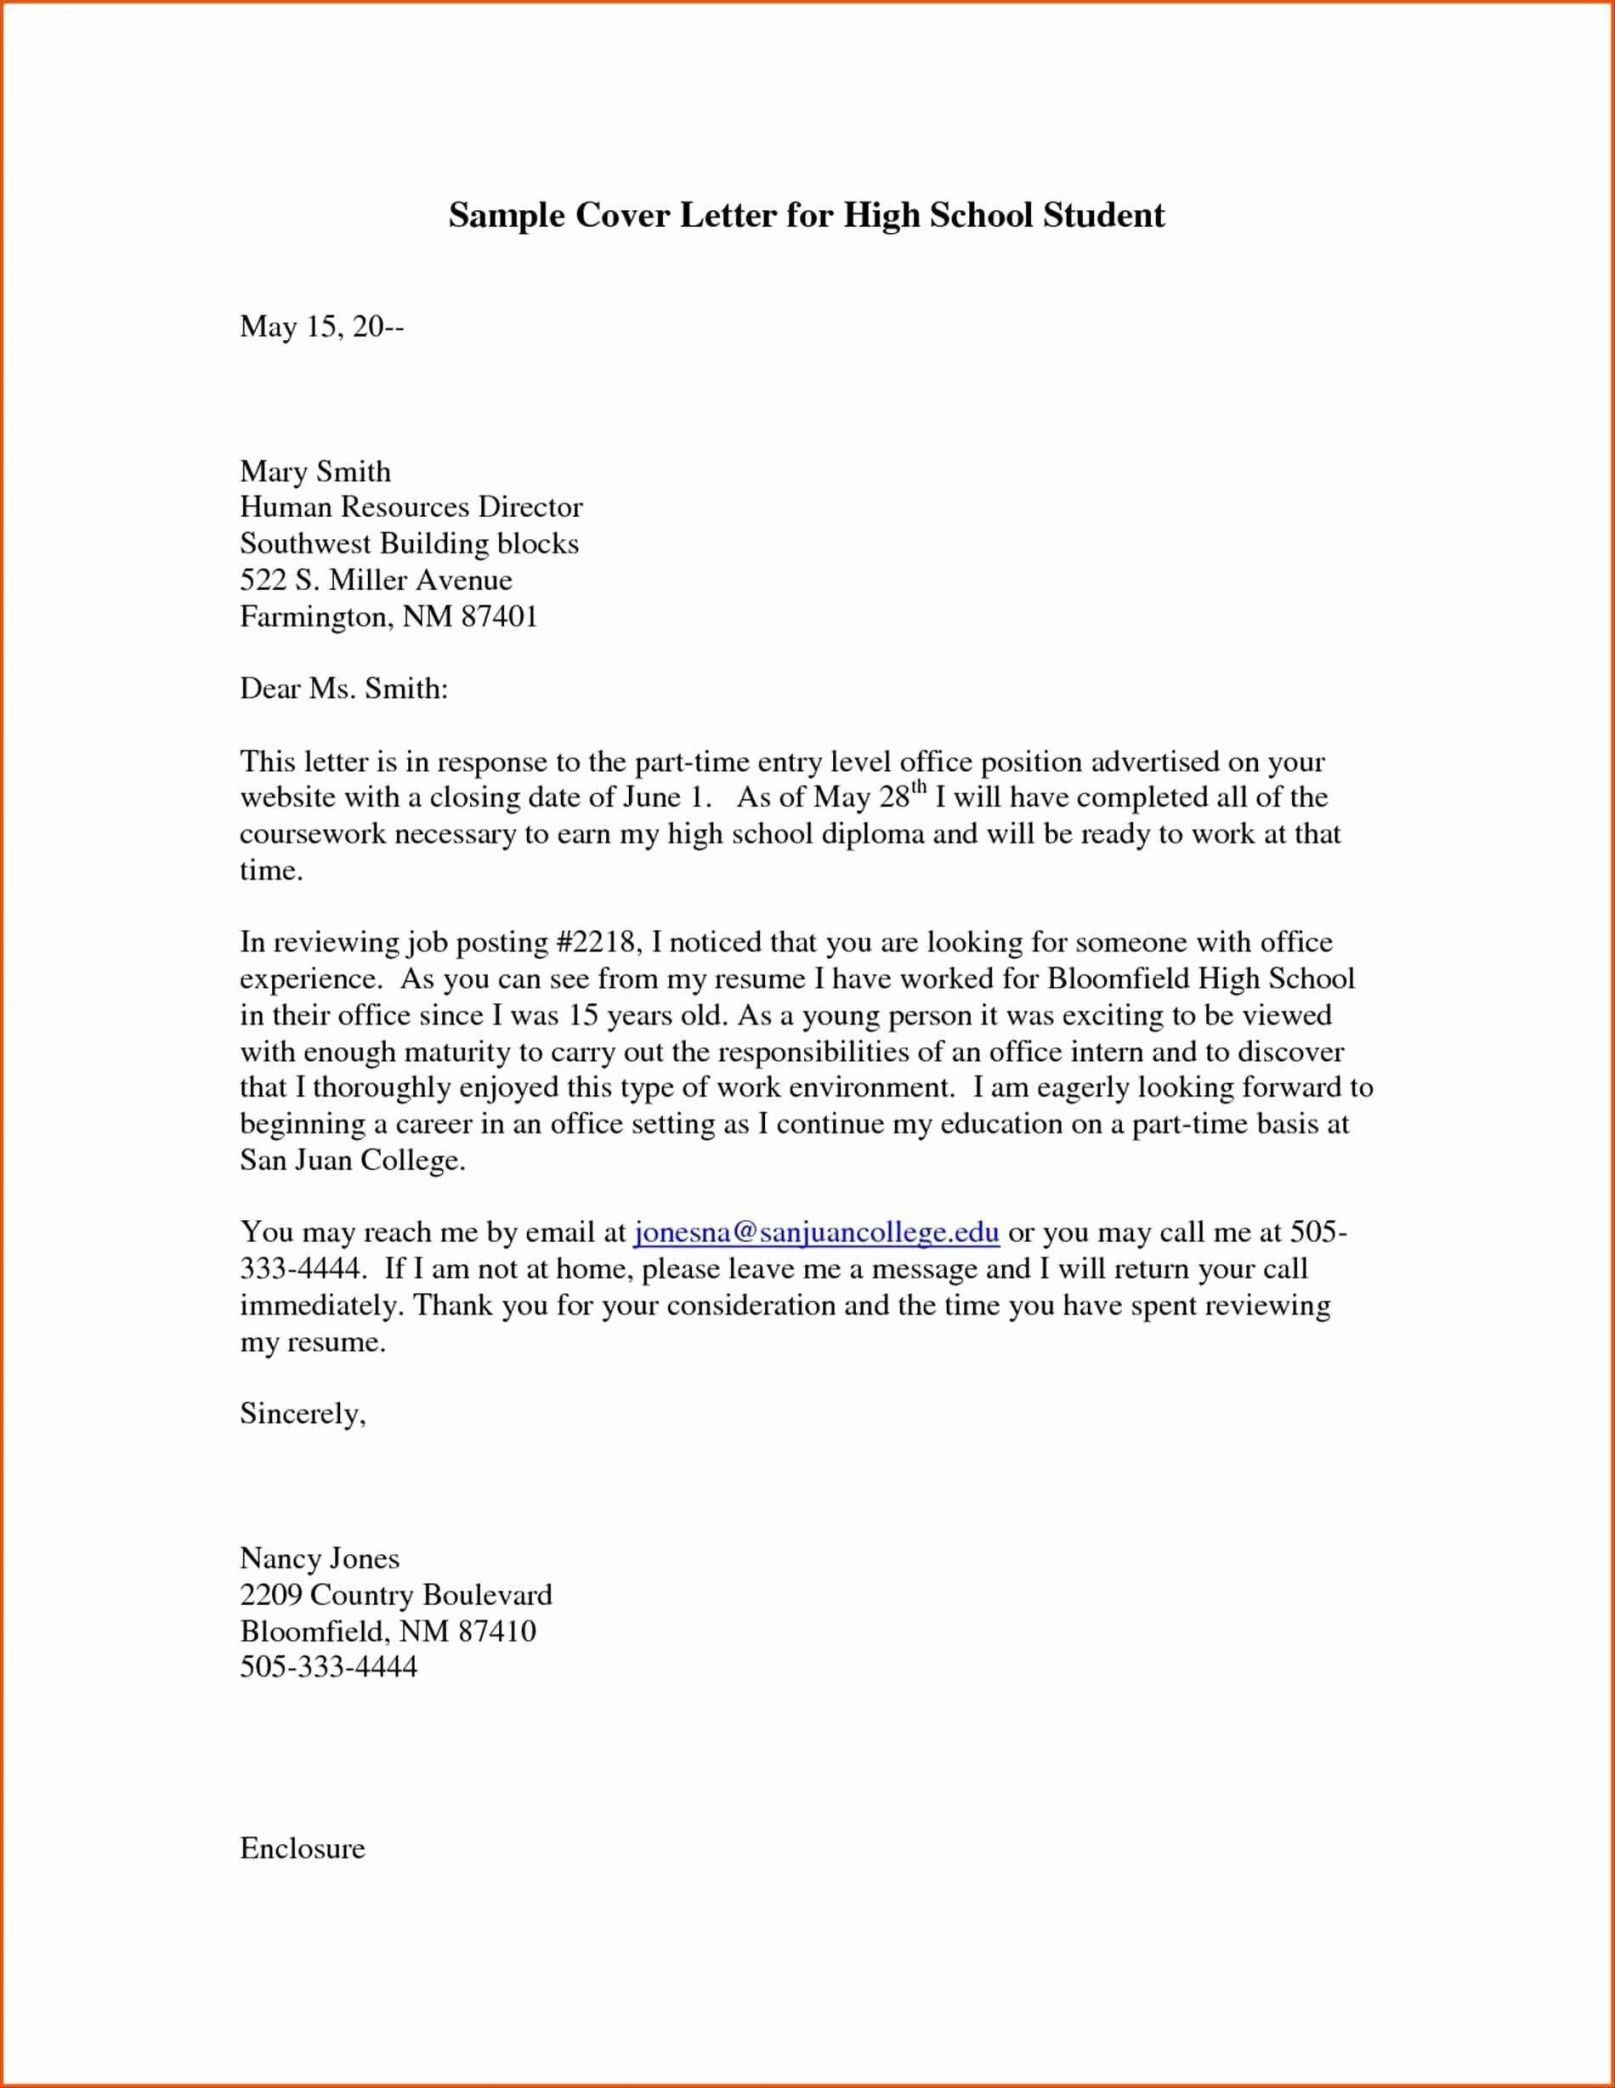 Sample Resume and Cover Letter for High School Students Get Our Image Of High School Cover Letter Template for Free …